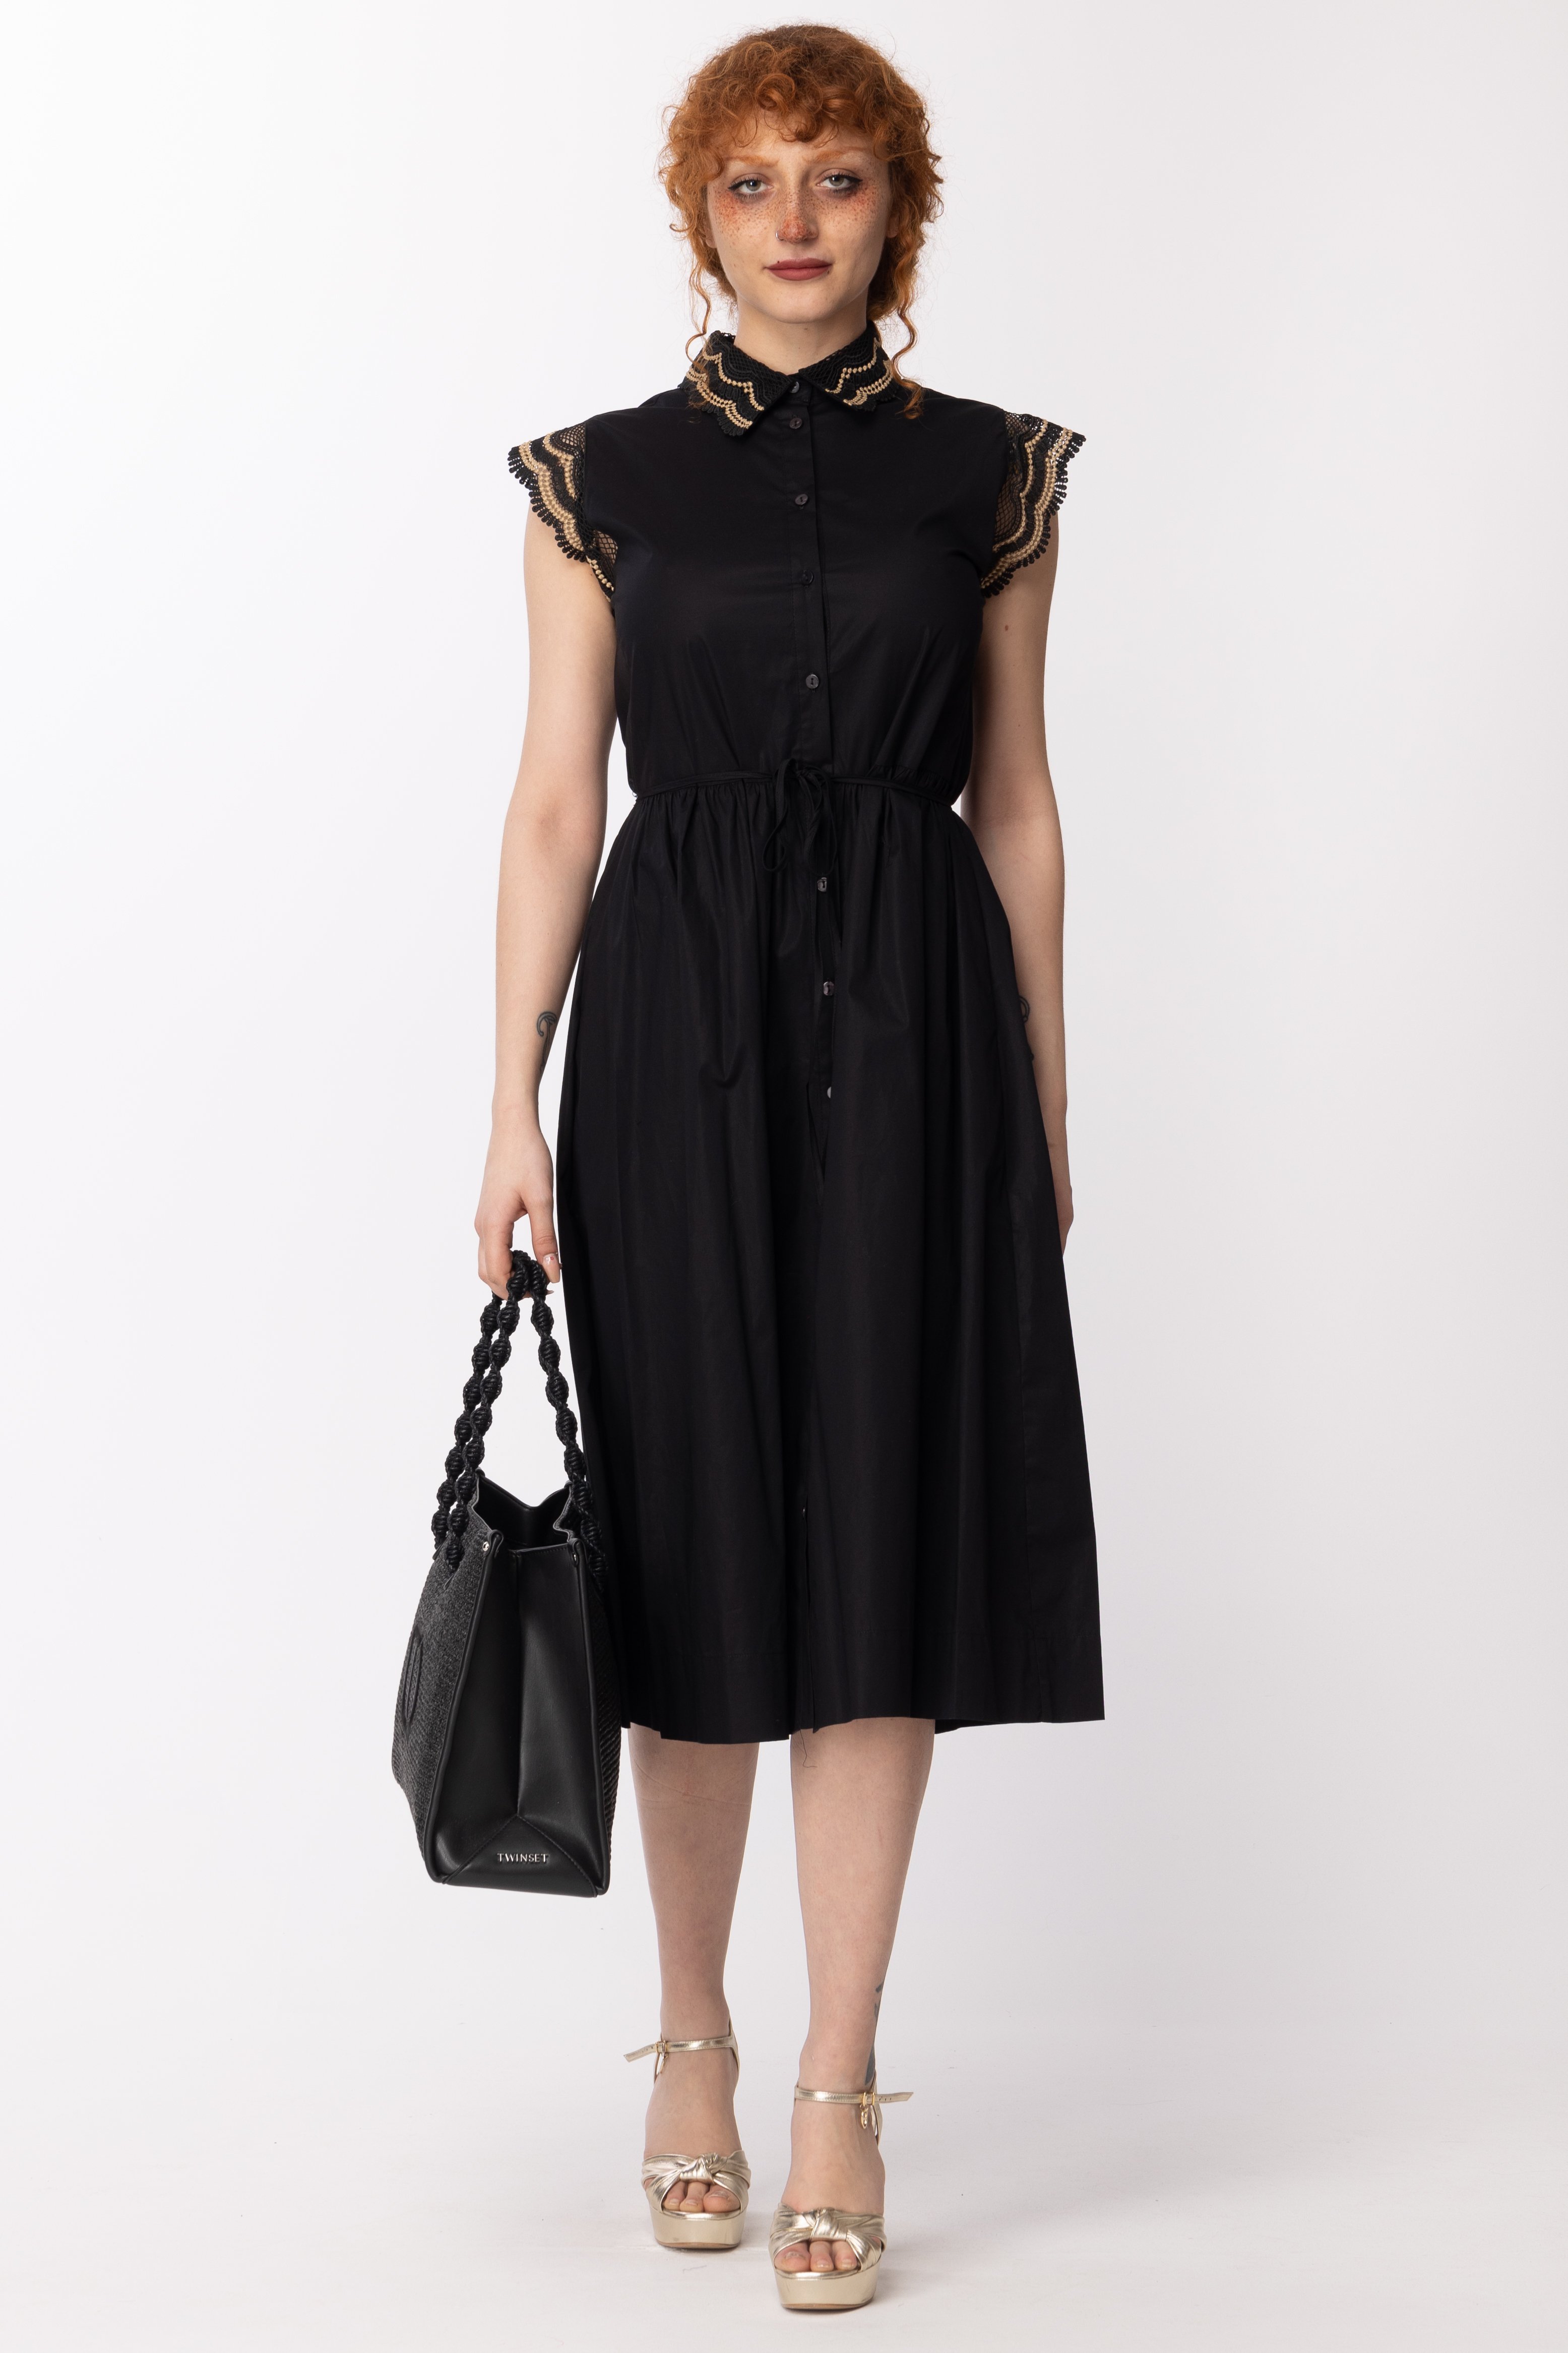 Preview: Twin-Set Chemisier dress with lace details RIC NERO/BEIGE